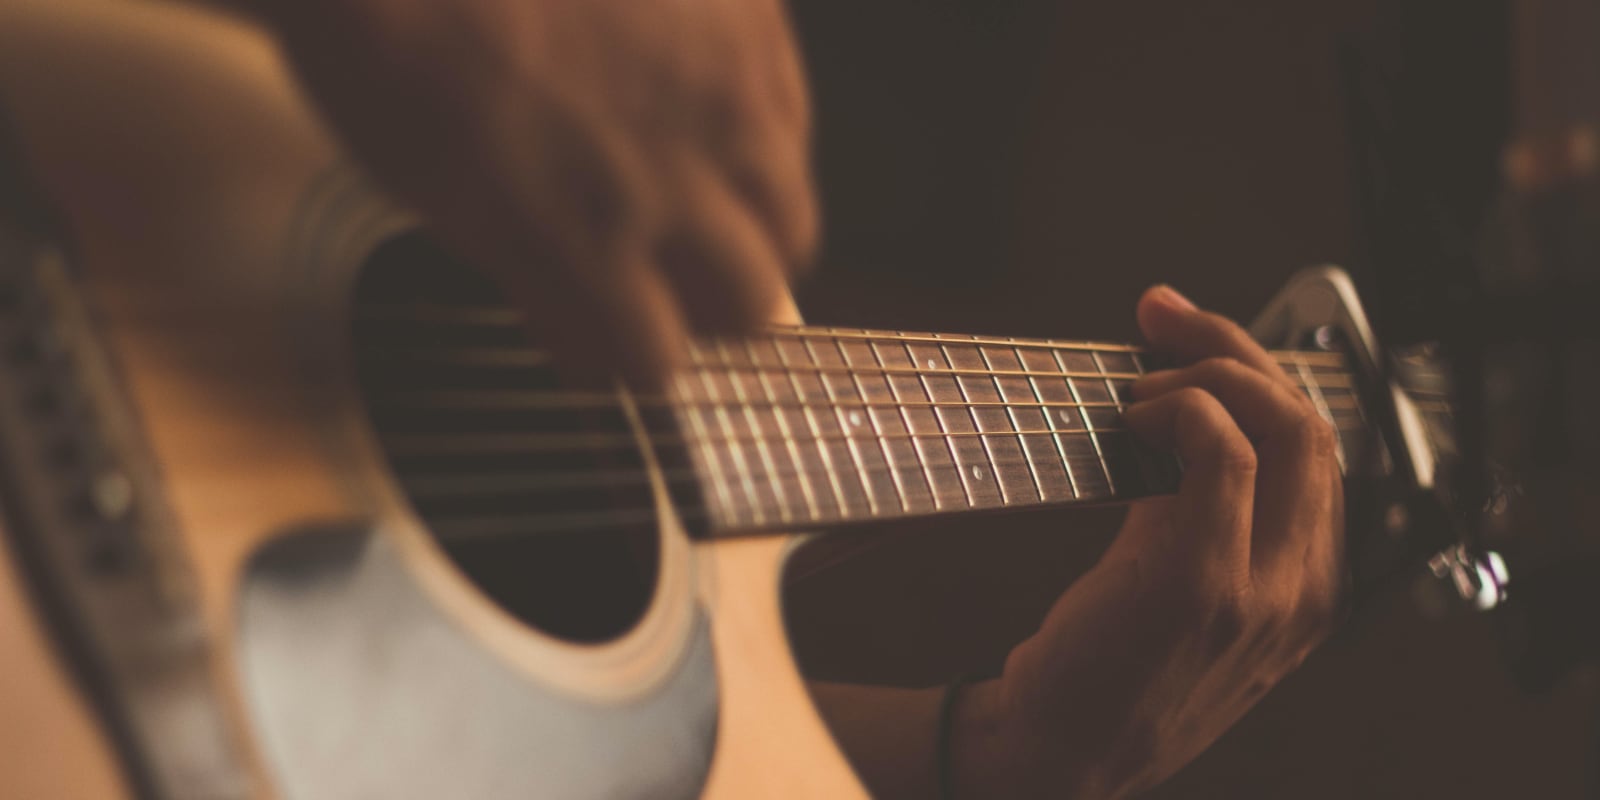 The 7 Best Sites for Learning to Play an Instrument